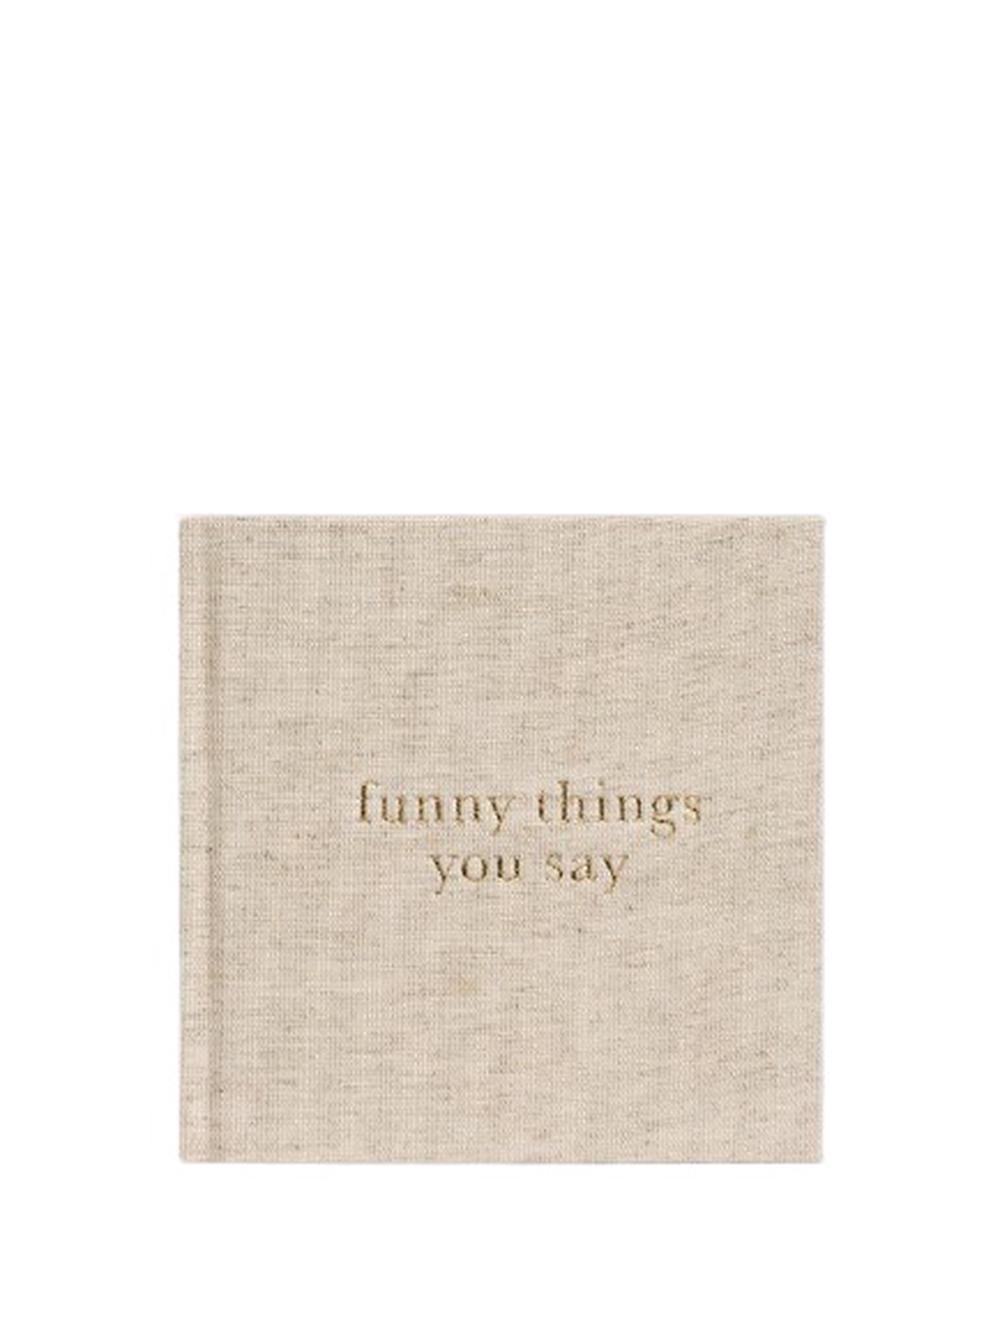 Write To Me - Funny Things You Say. (Oatmeal), Hardcover, 0793618539276 |  Buy online at Tiny Fox